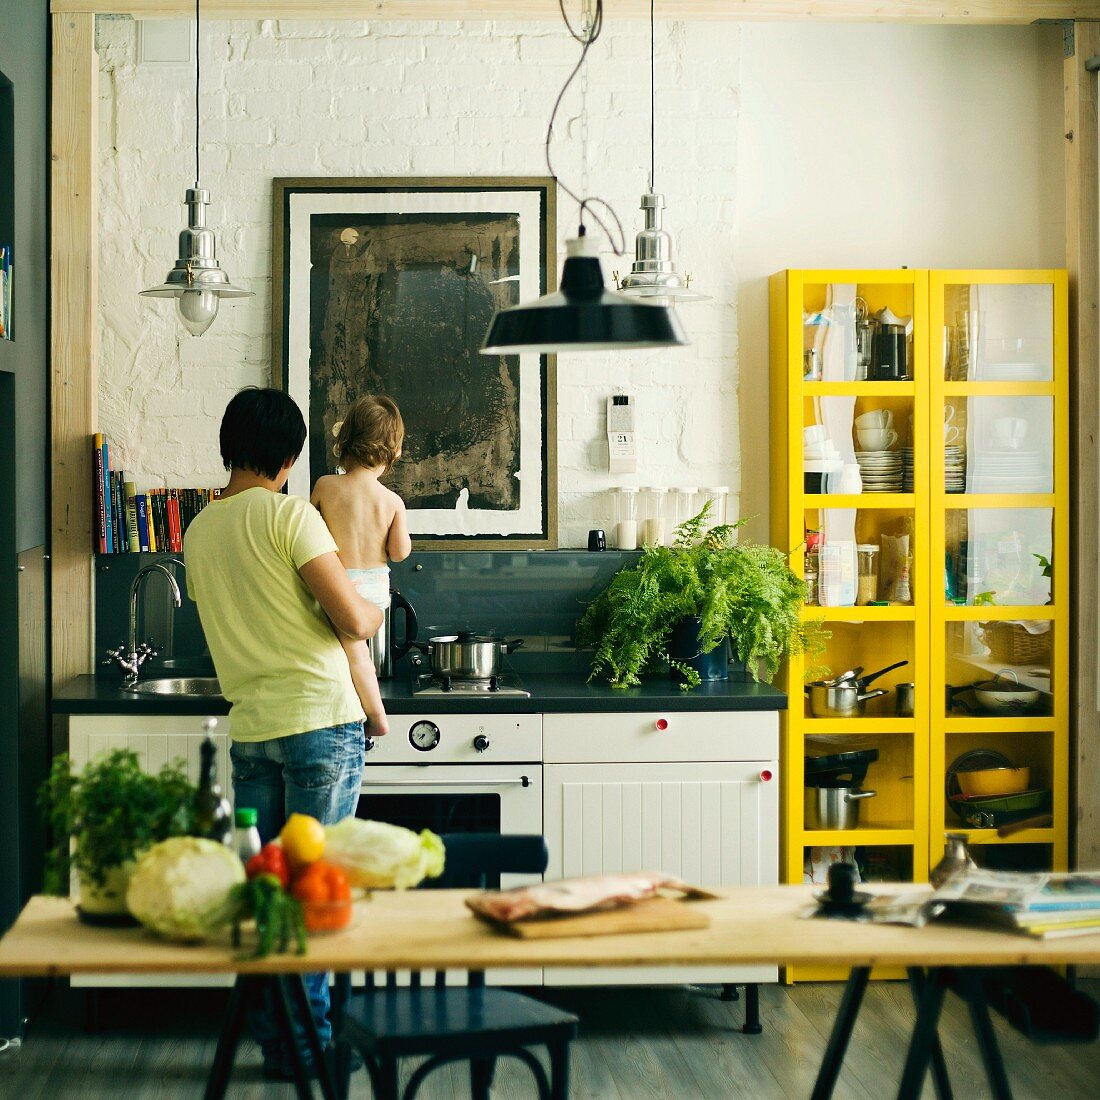 Father holding son in kitchen